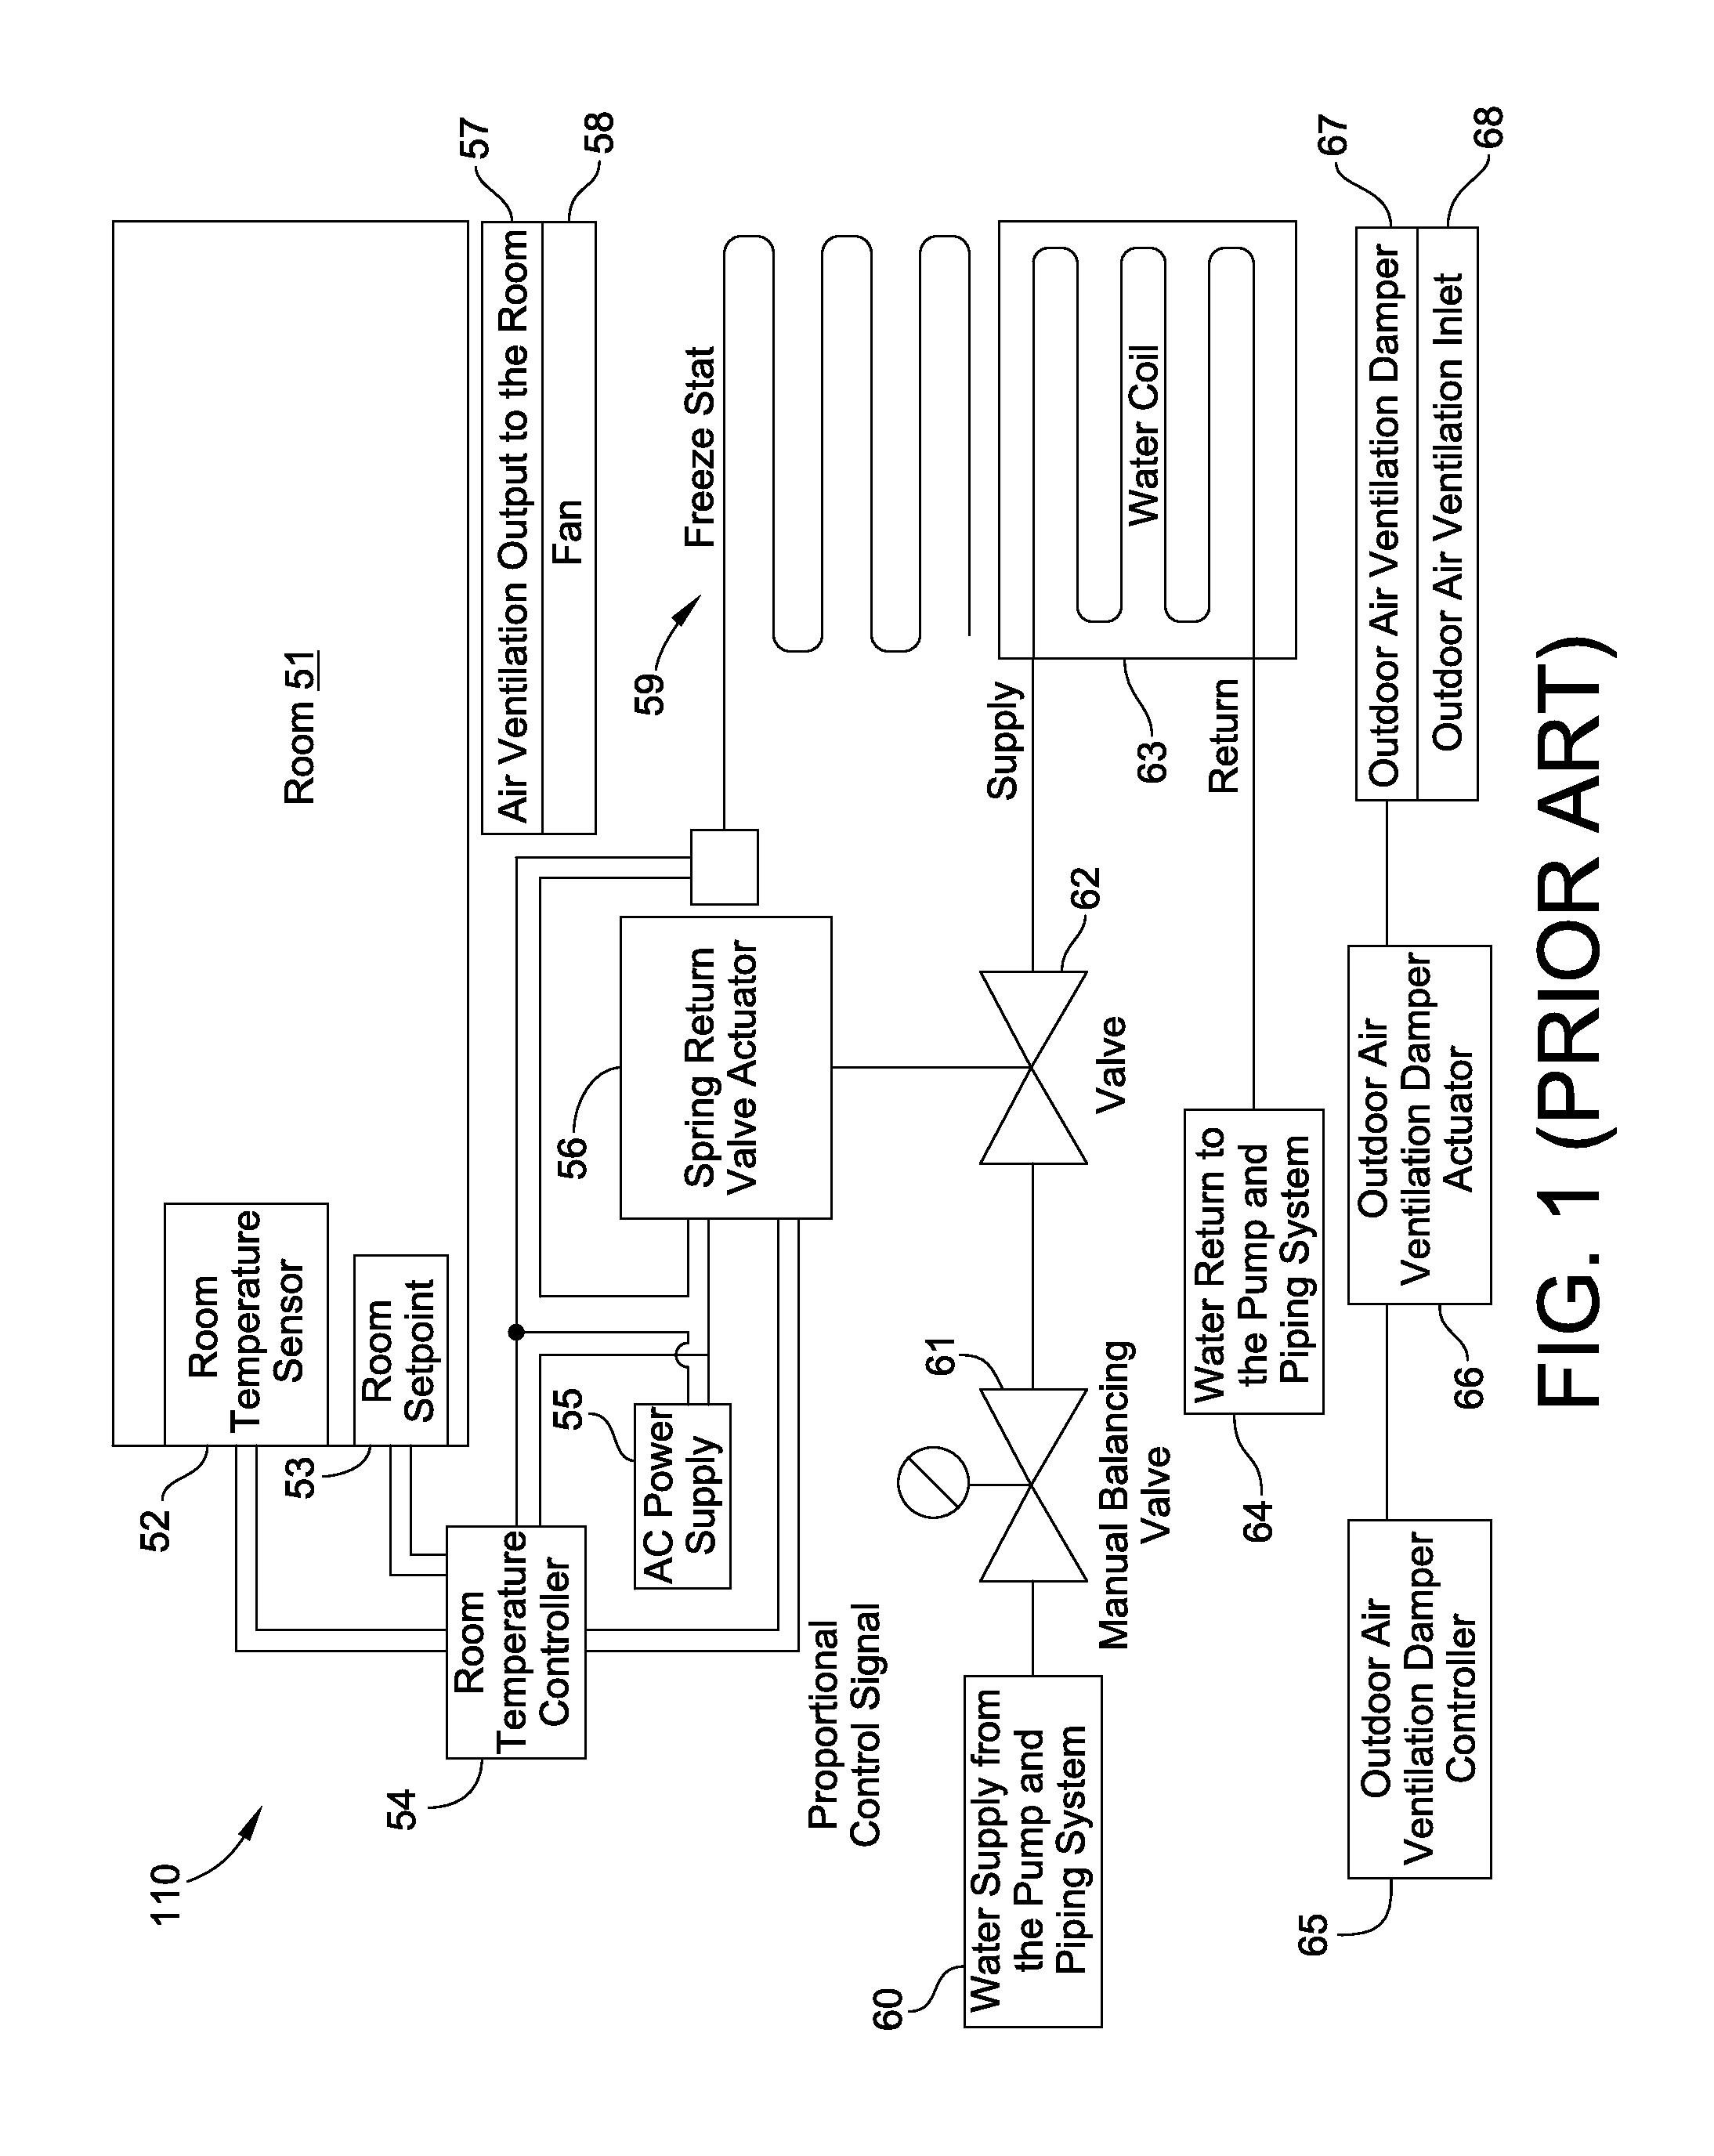 Advanced Valve Actuator With Remote Location Flow Reset